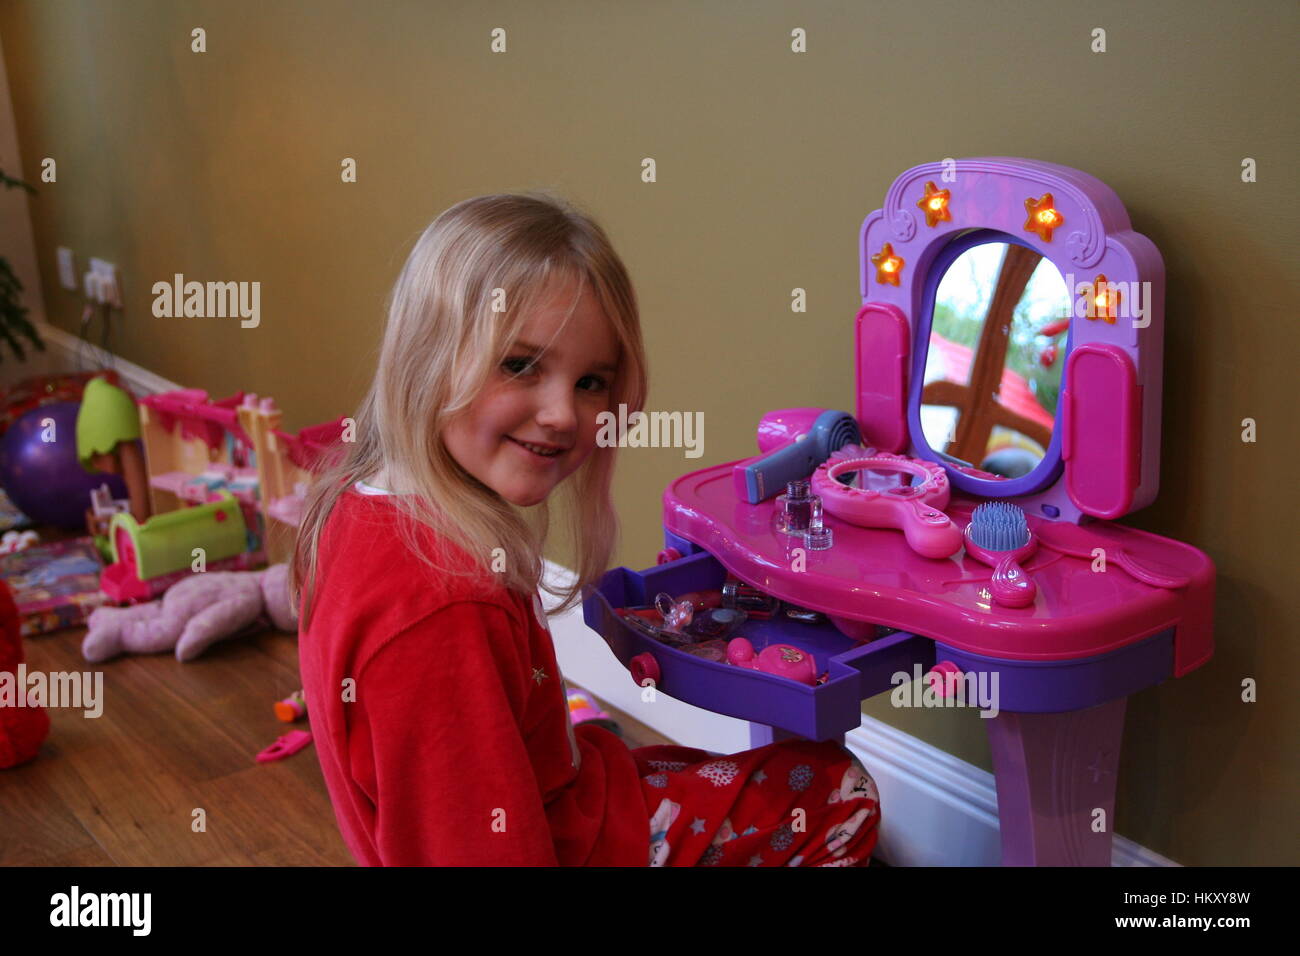 Little girl, child trying out makeup at her makeup table on christmas morning concept, presents gifts, santa came, childhood joy, excitement Stock Photo